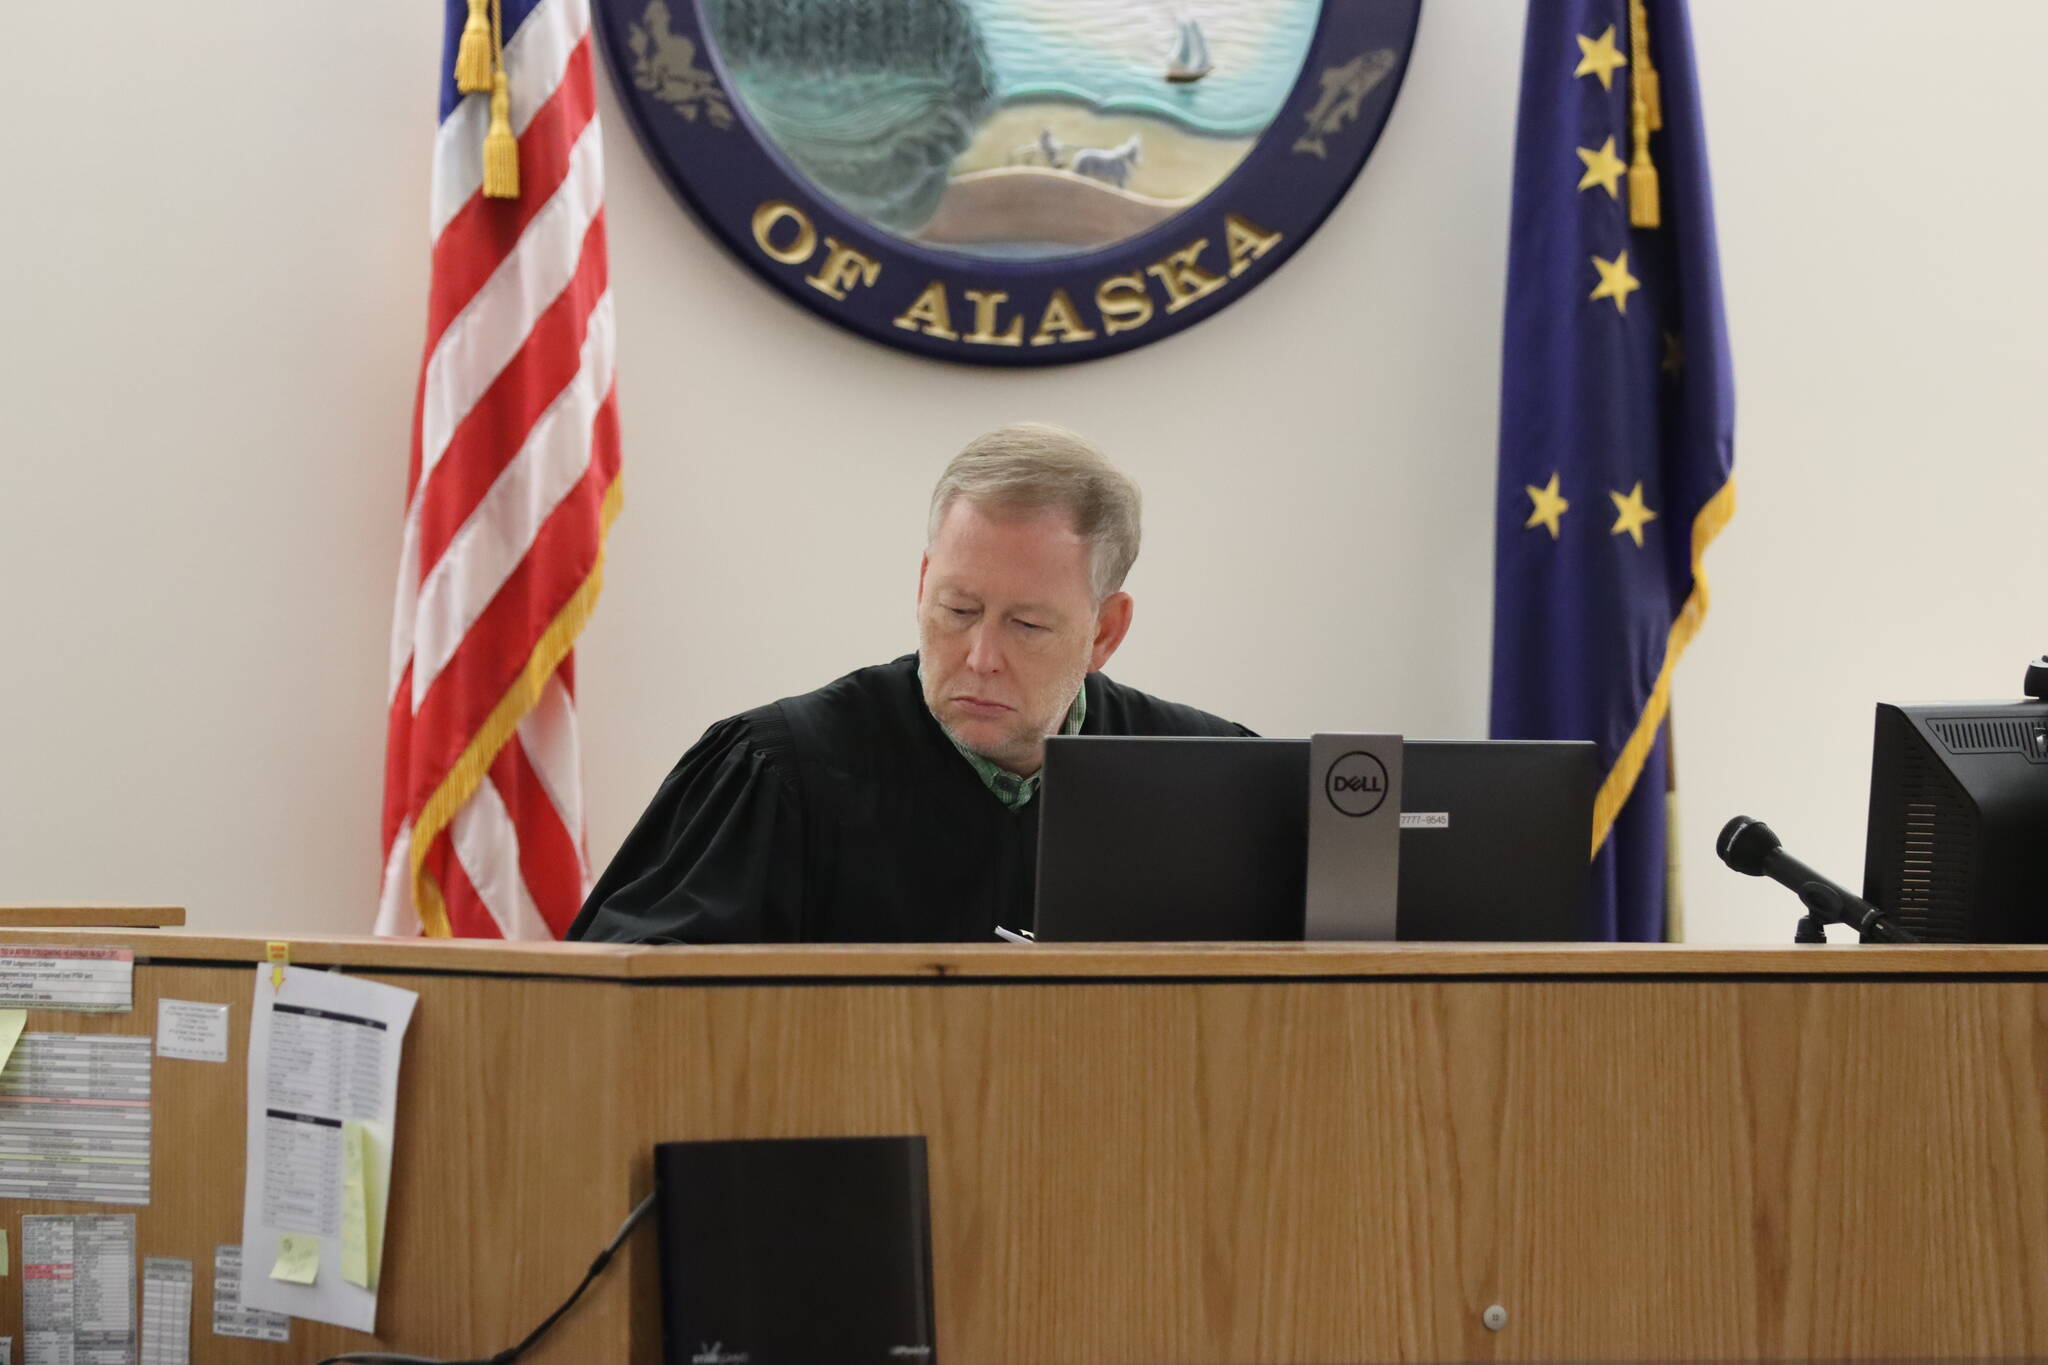 Judge Daniel Schally speaks as he hands down the sentencing for a Juneau man found guilty of sexual abuse of women and children over several decades on June 2, 2022. (Michael S. Lockett / Juneau Empire)